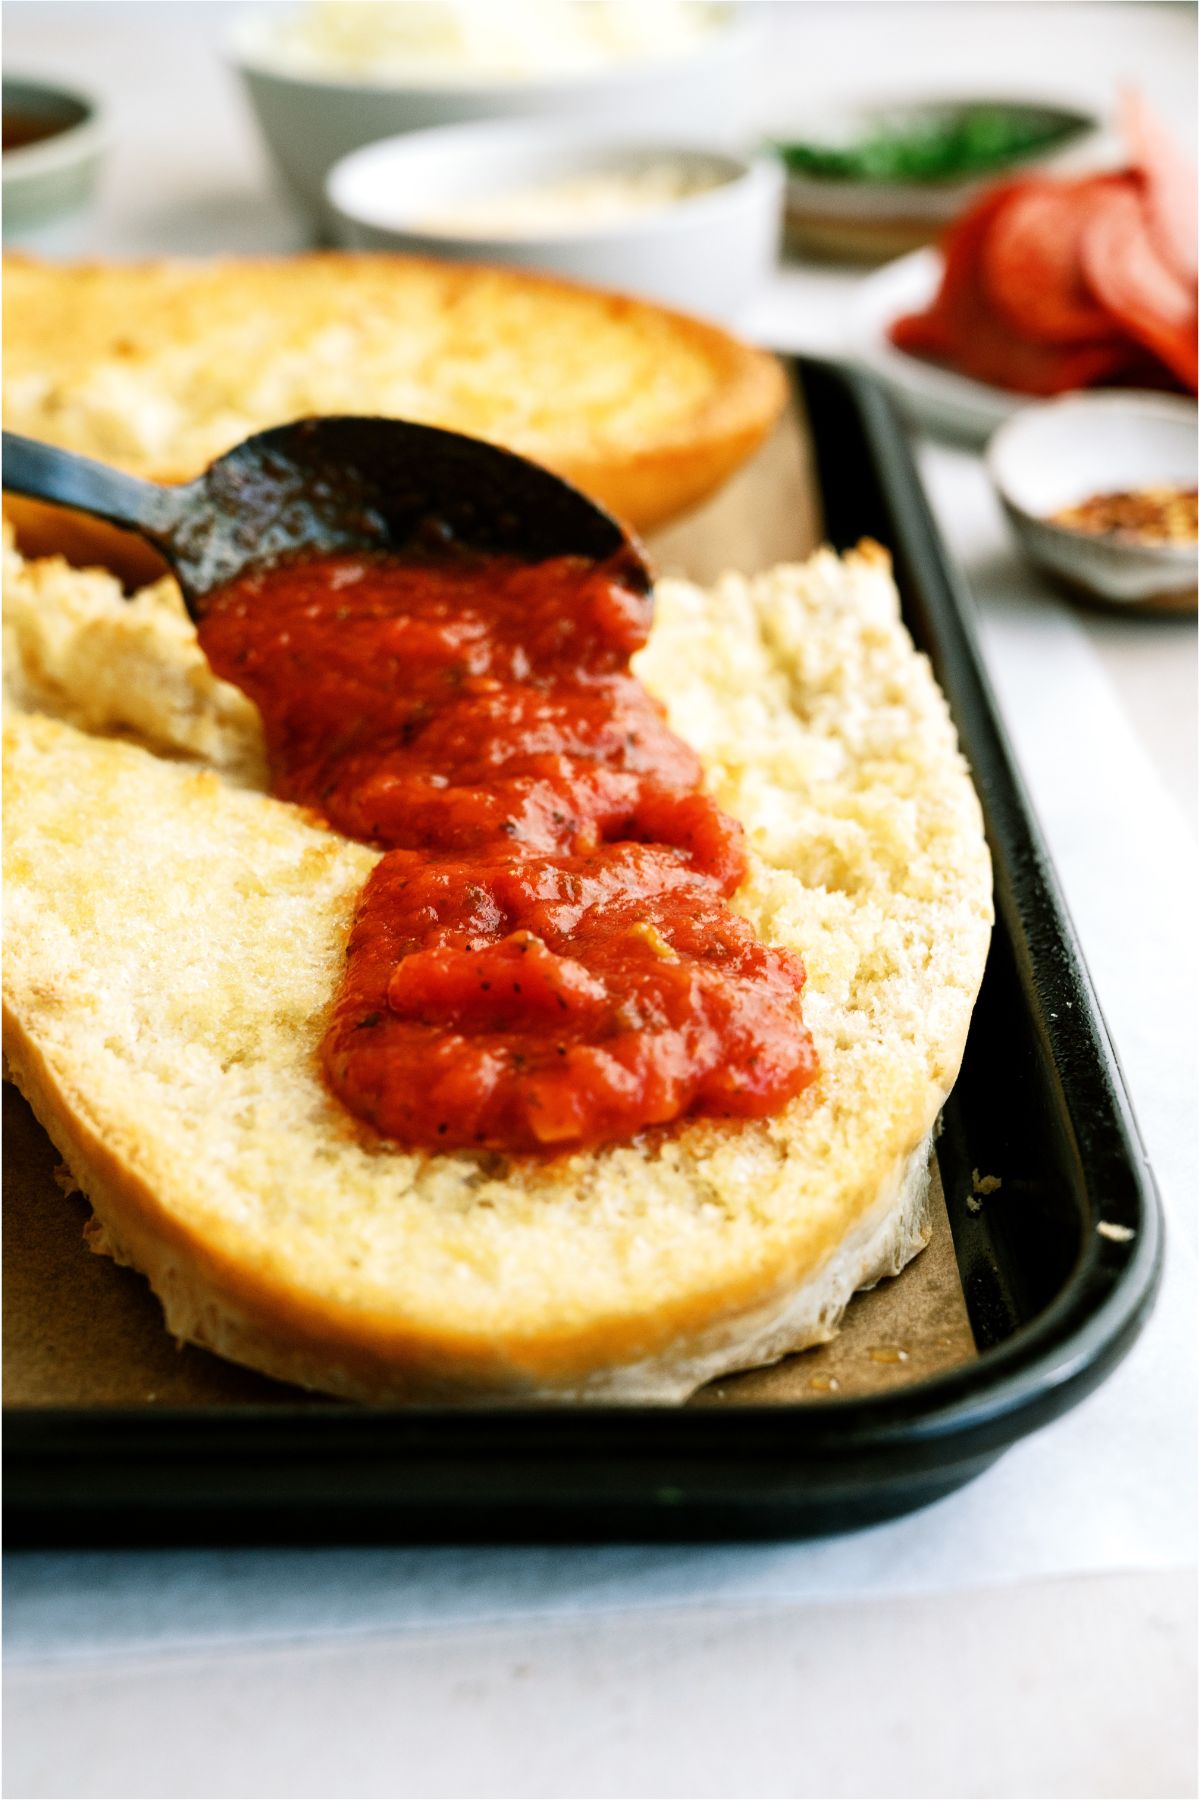 Spreading pizza sauce on a slice of French Bread